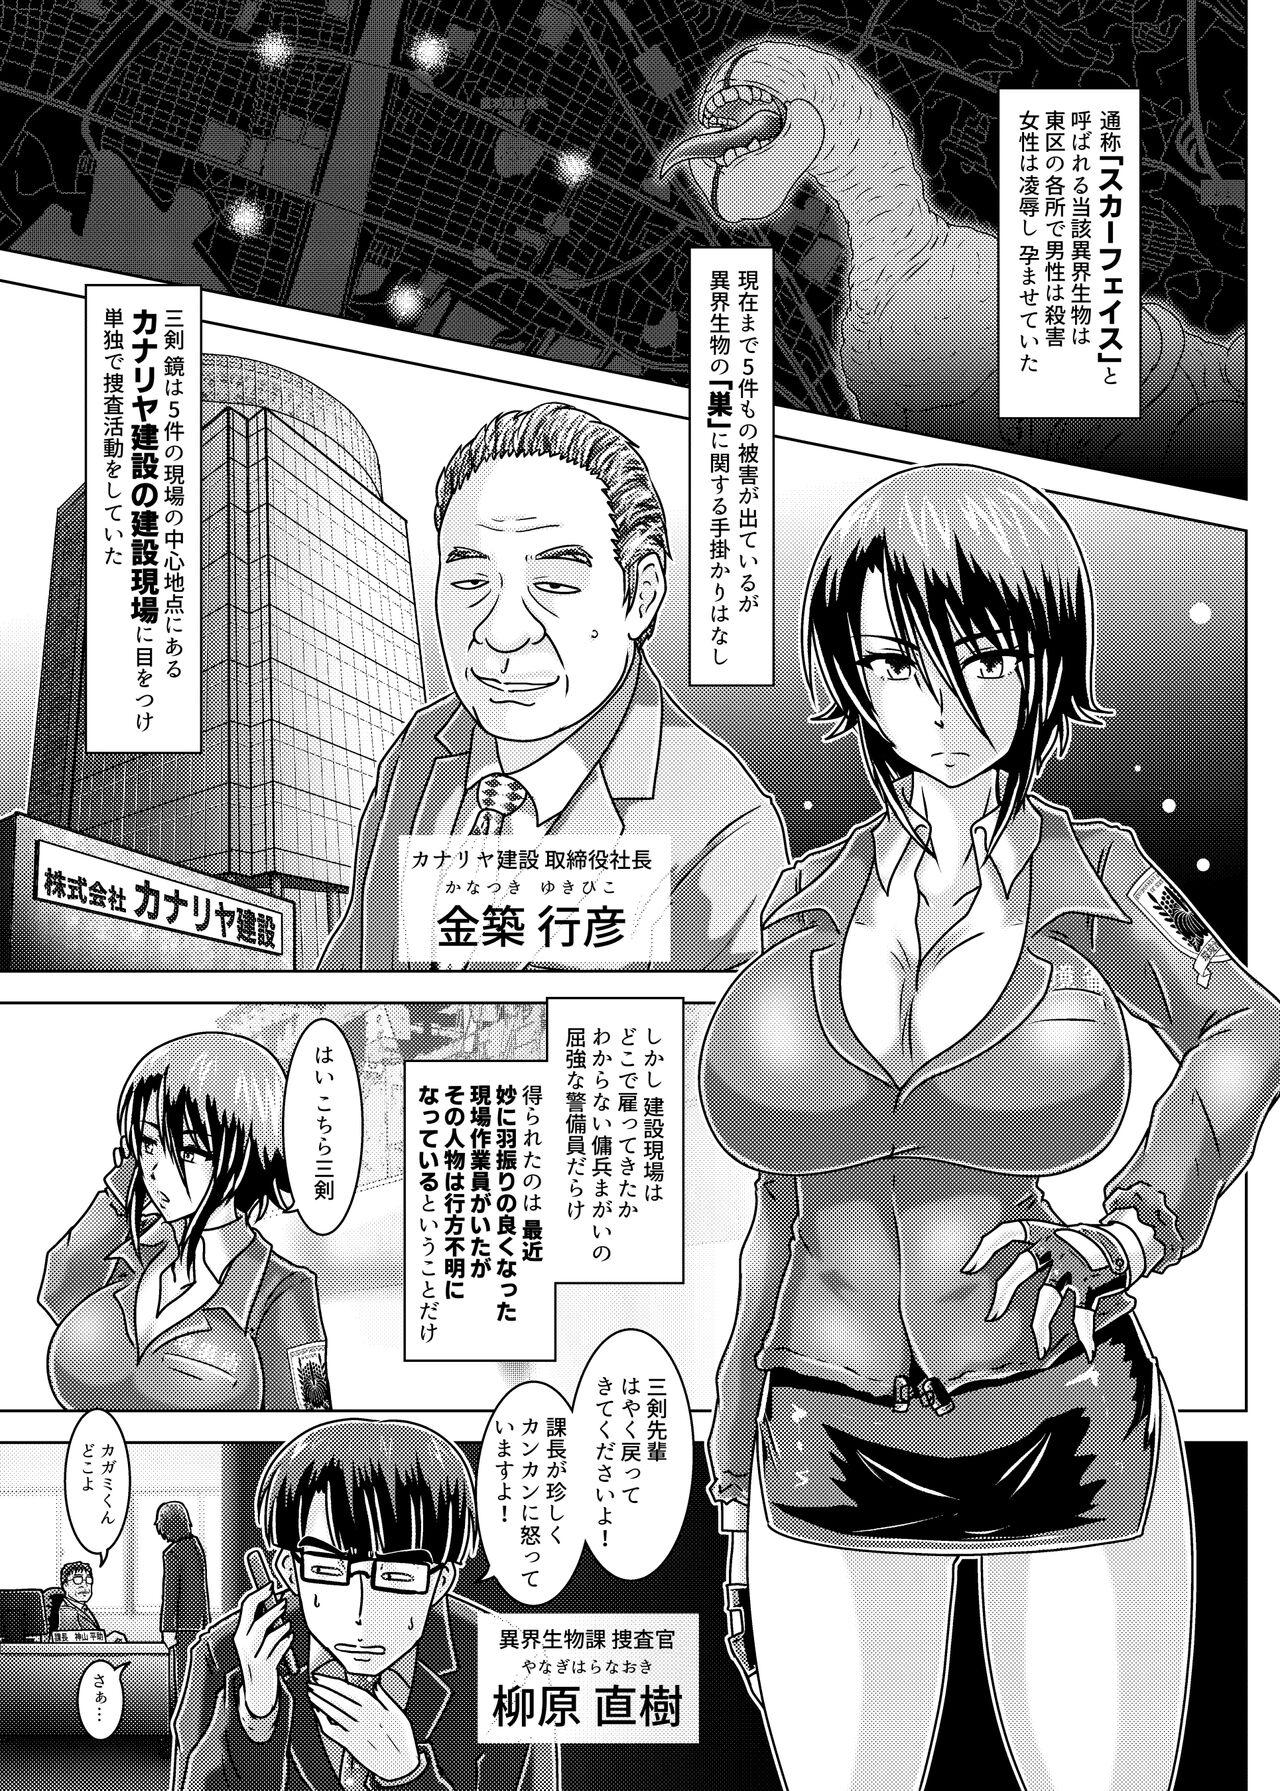 Lick TRIAL PRODUCT - 環境治安局捜査官・三剣鏡 Bucetuda - Page 6